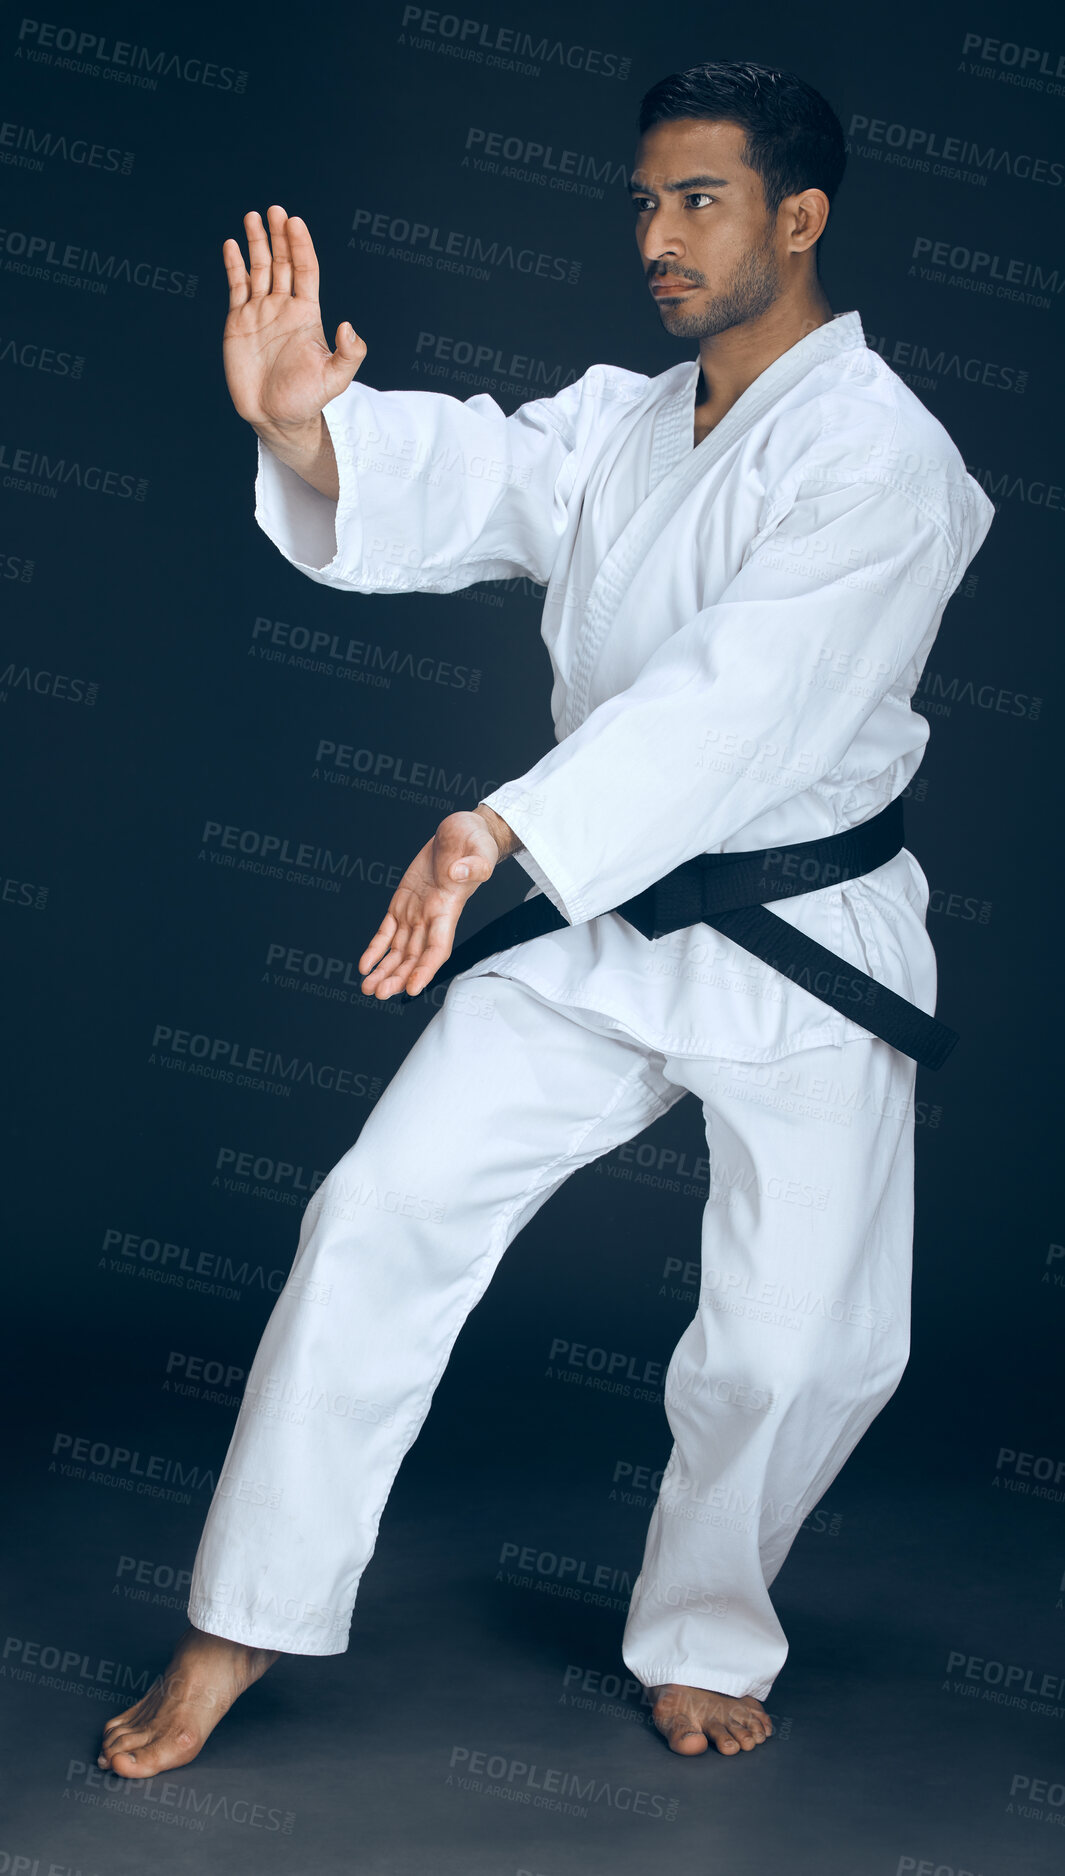 Buy stock photo Full length shot of a handsome young male martial artist practicing karate in studio against a dark background